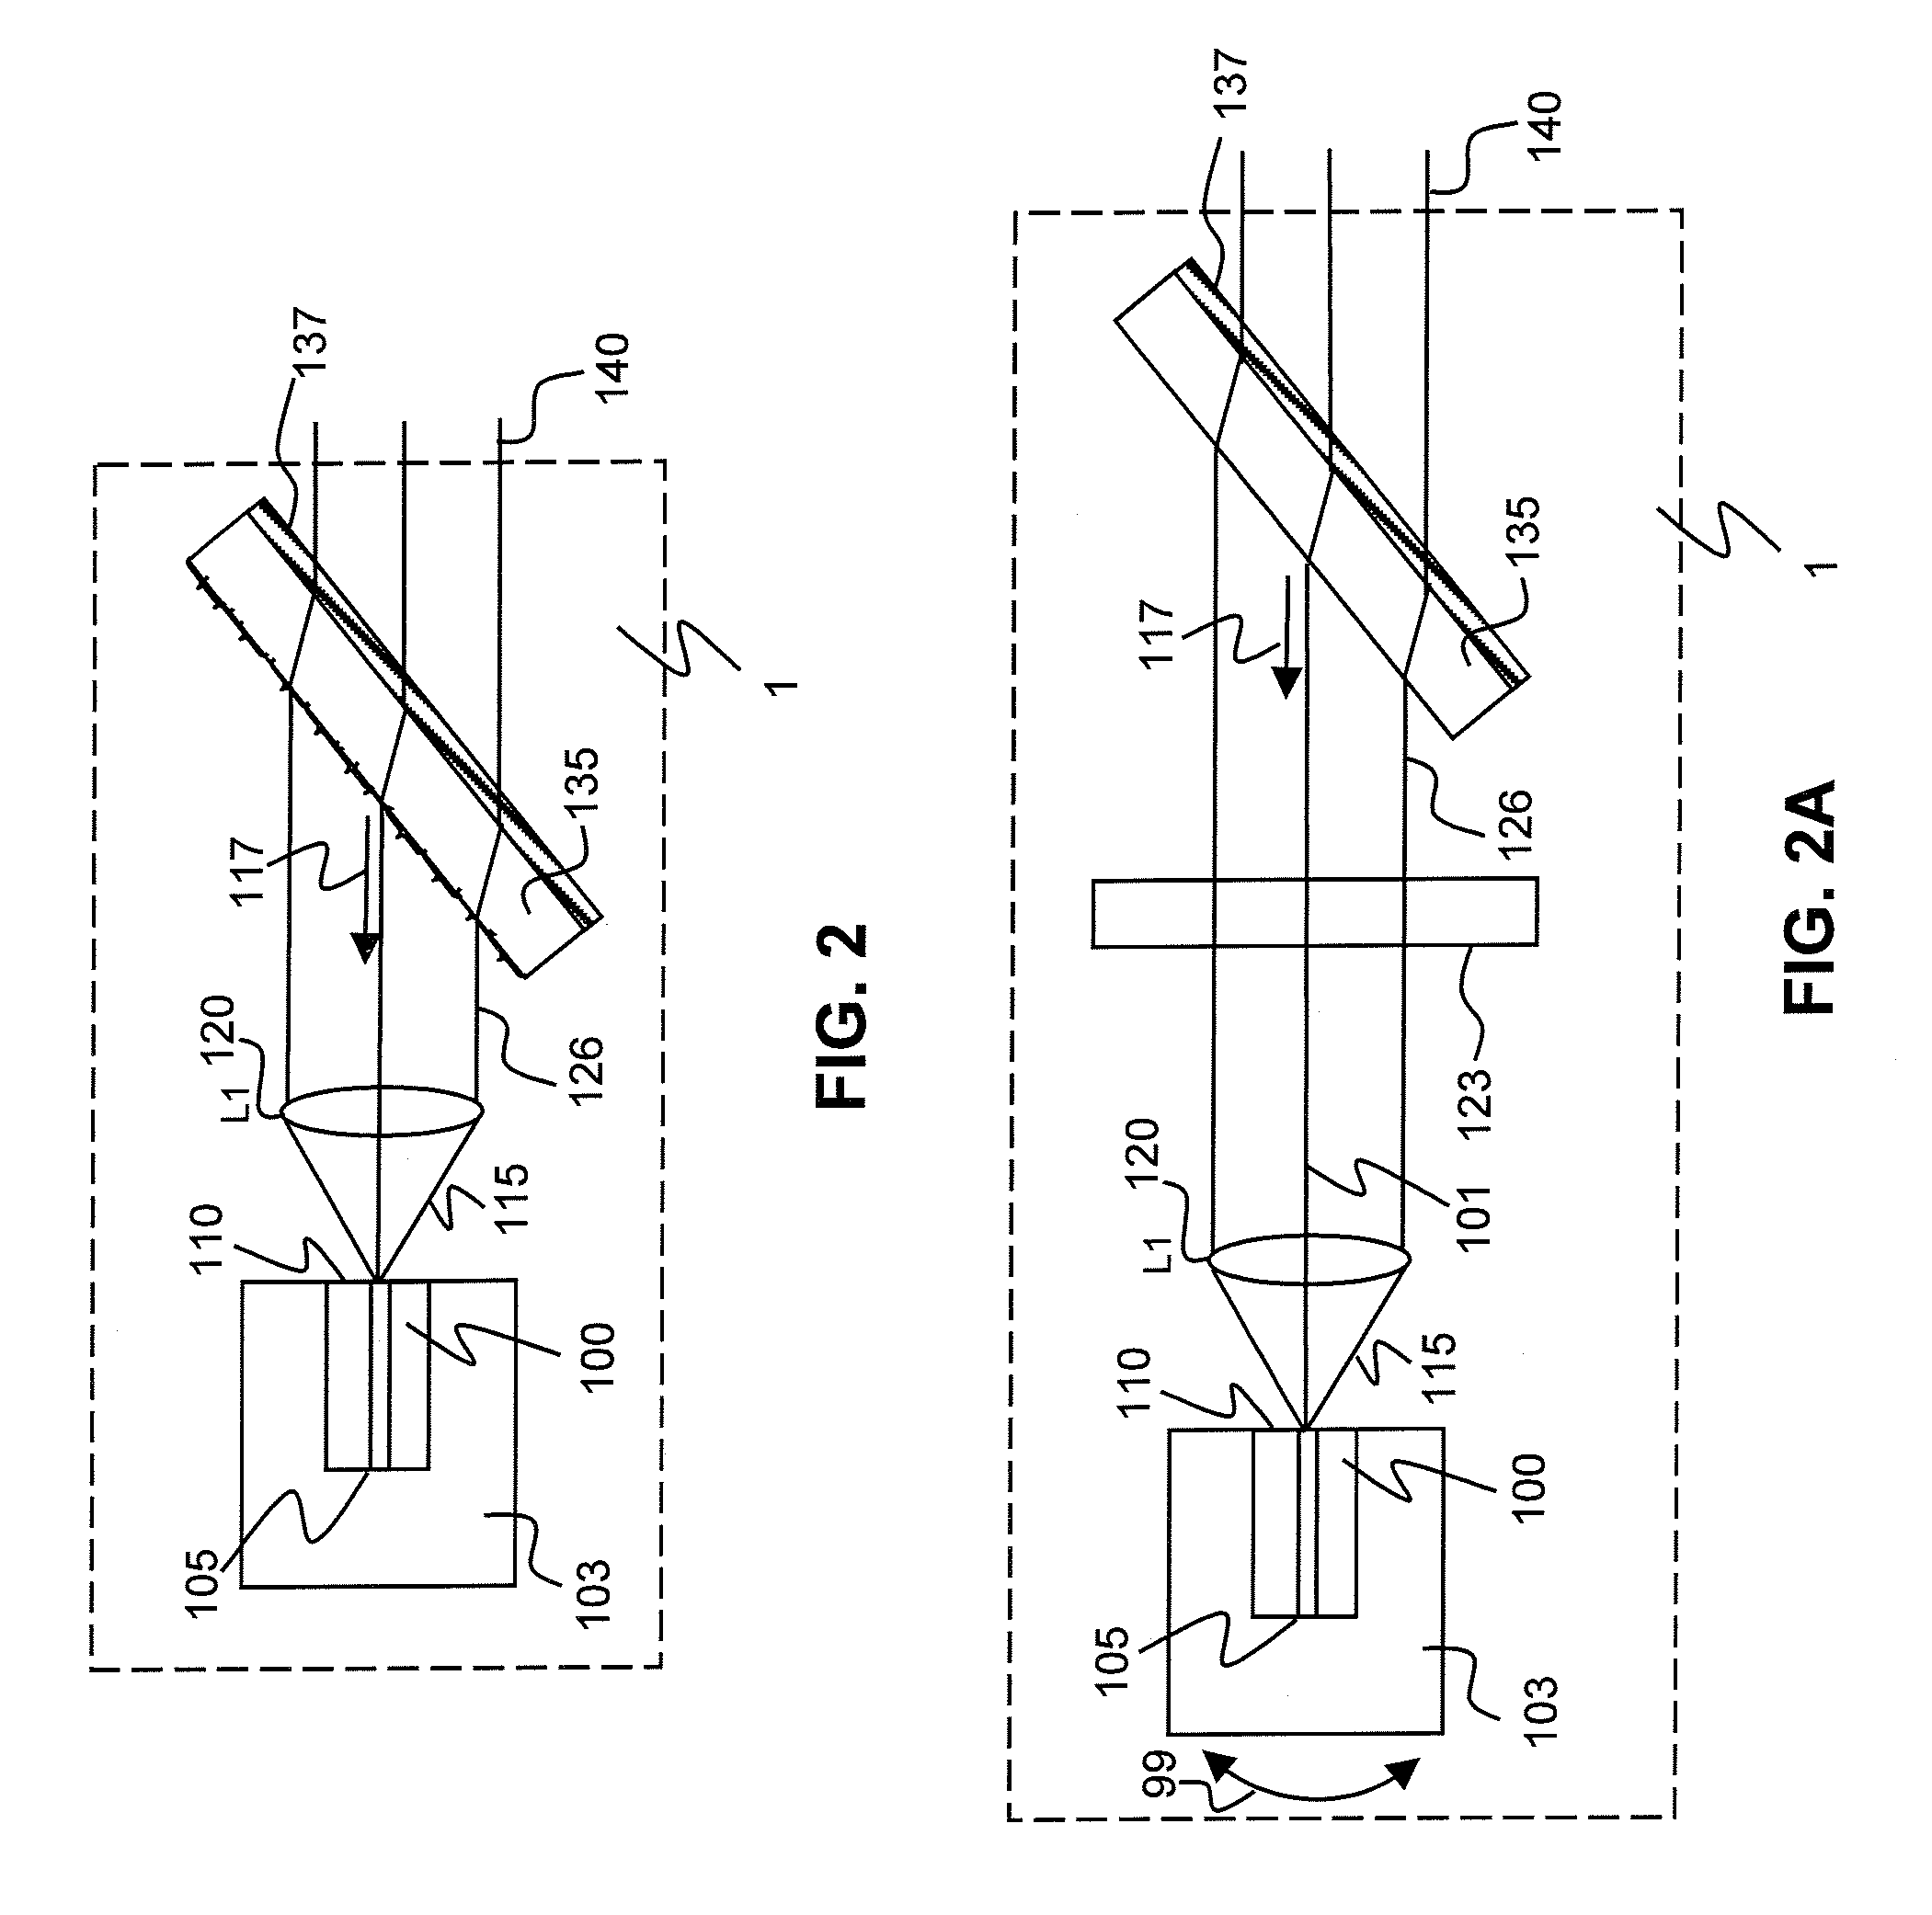 Extended cavity laser device with bulk transmission grating